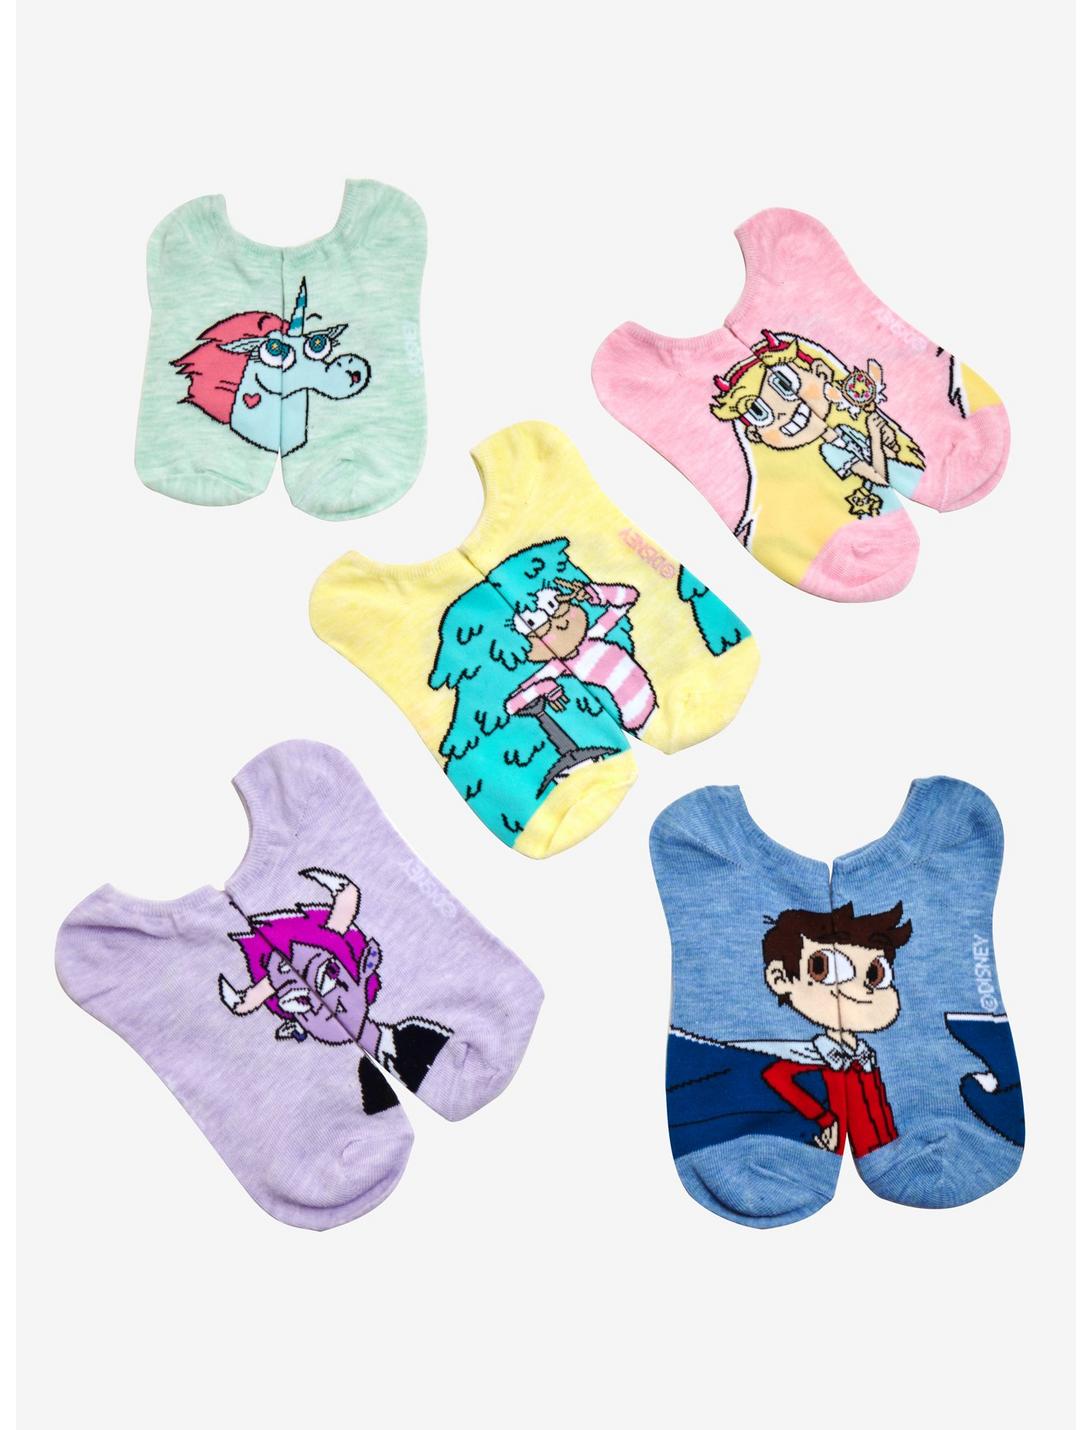 Star Vs. the Forces of Evil Character No-Show Socks 5 Pair, , hi-res